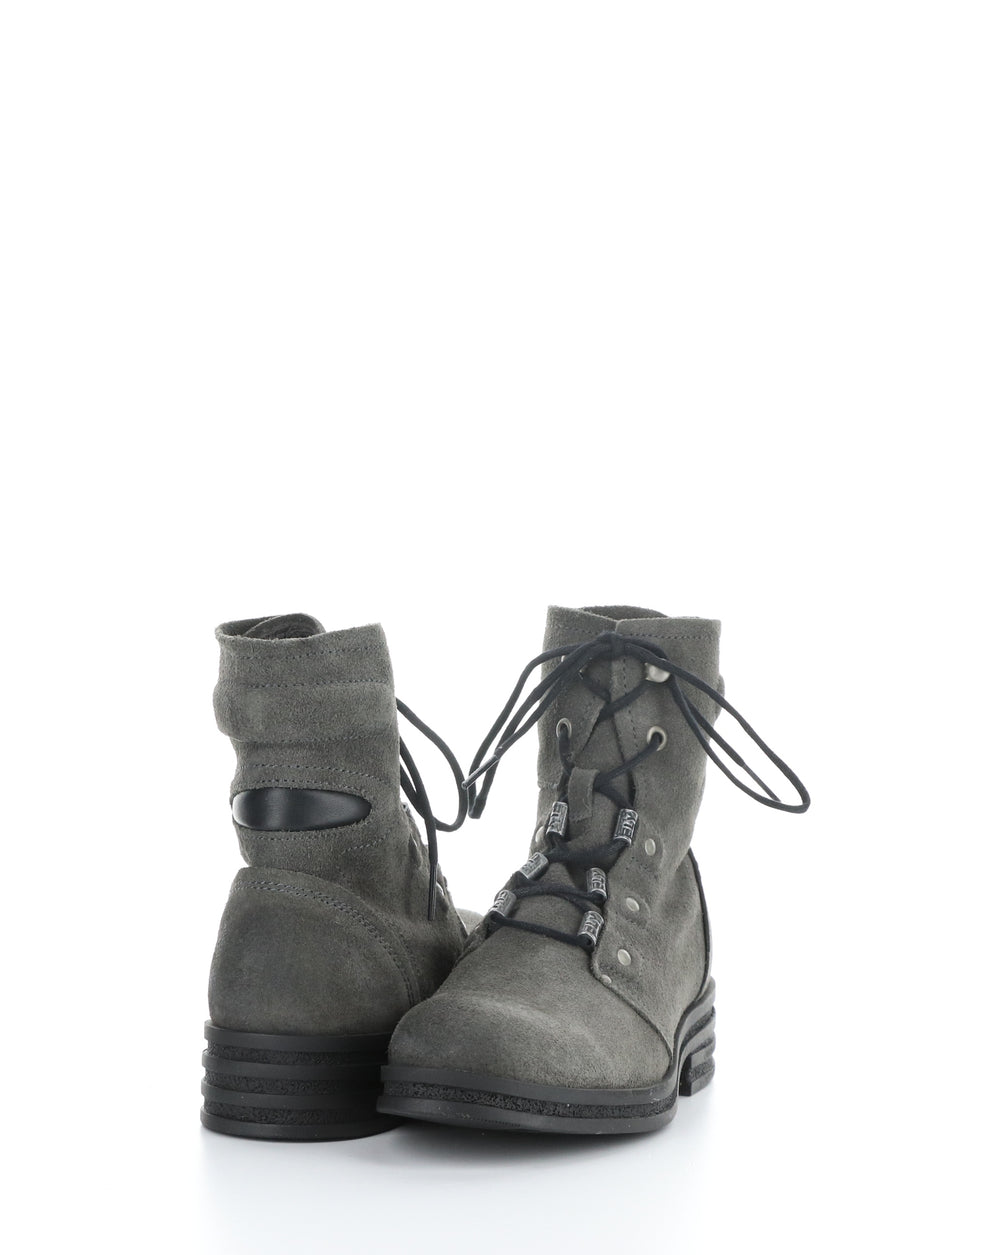 KNOT792FLY 006 DIESEL Lace-up Boots